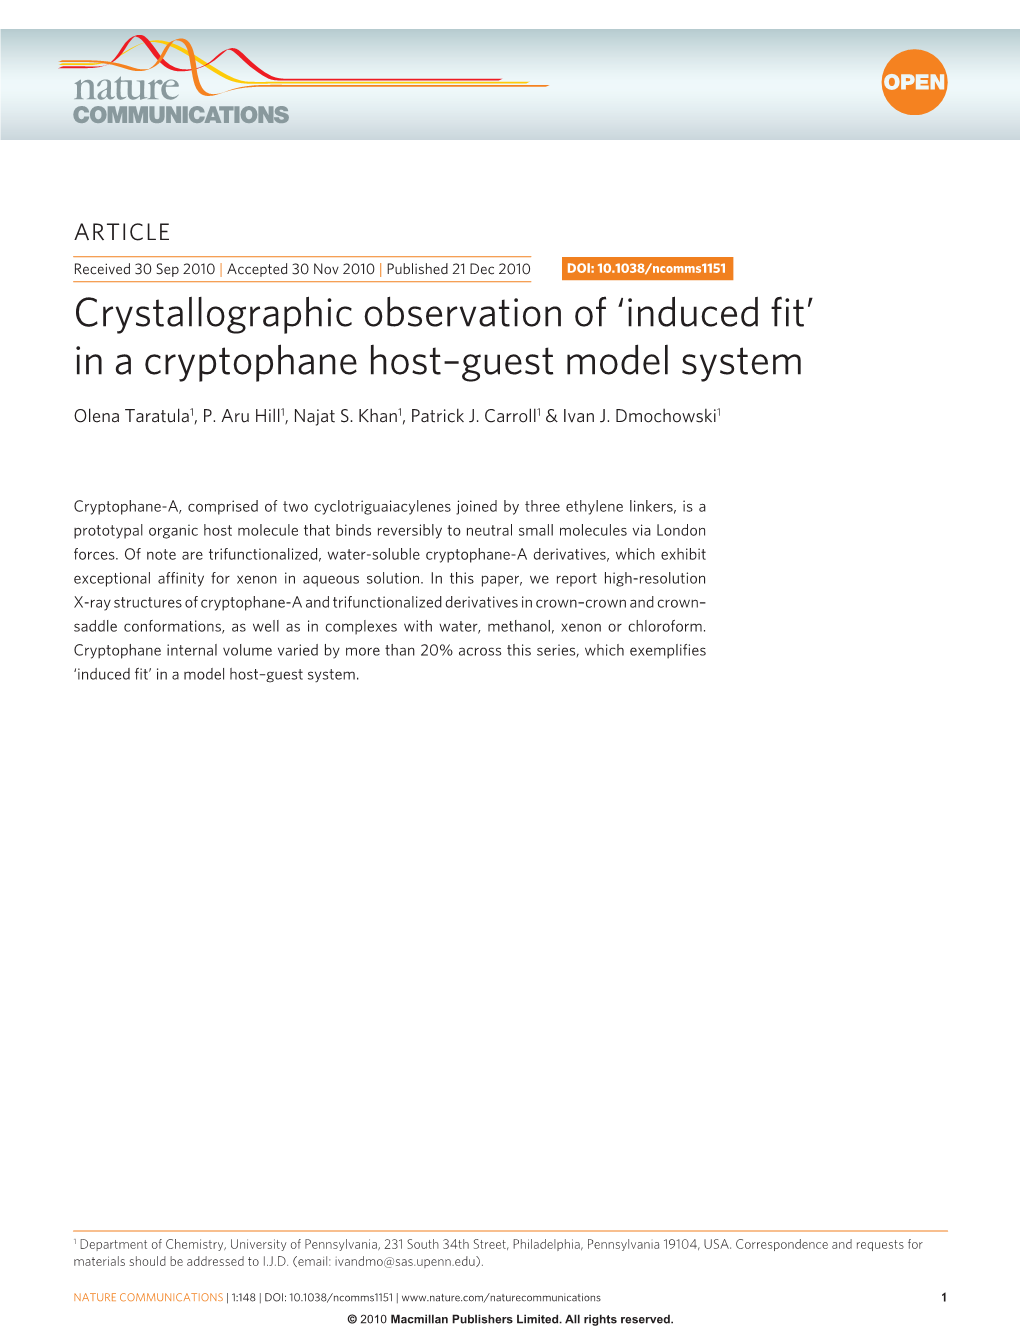 Crystallographic Observation of 'Induced Fit' in a Cryptophane Host&Ndash;Guest Model System